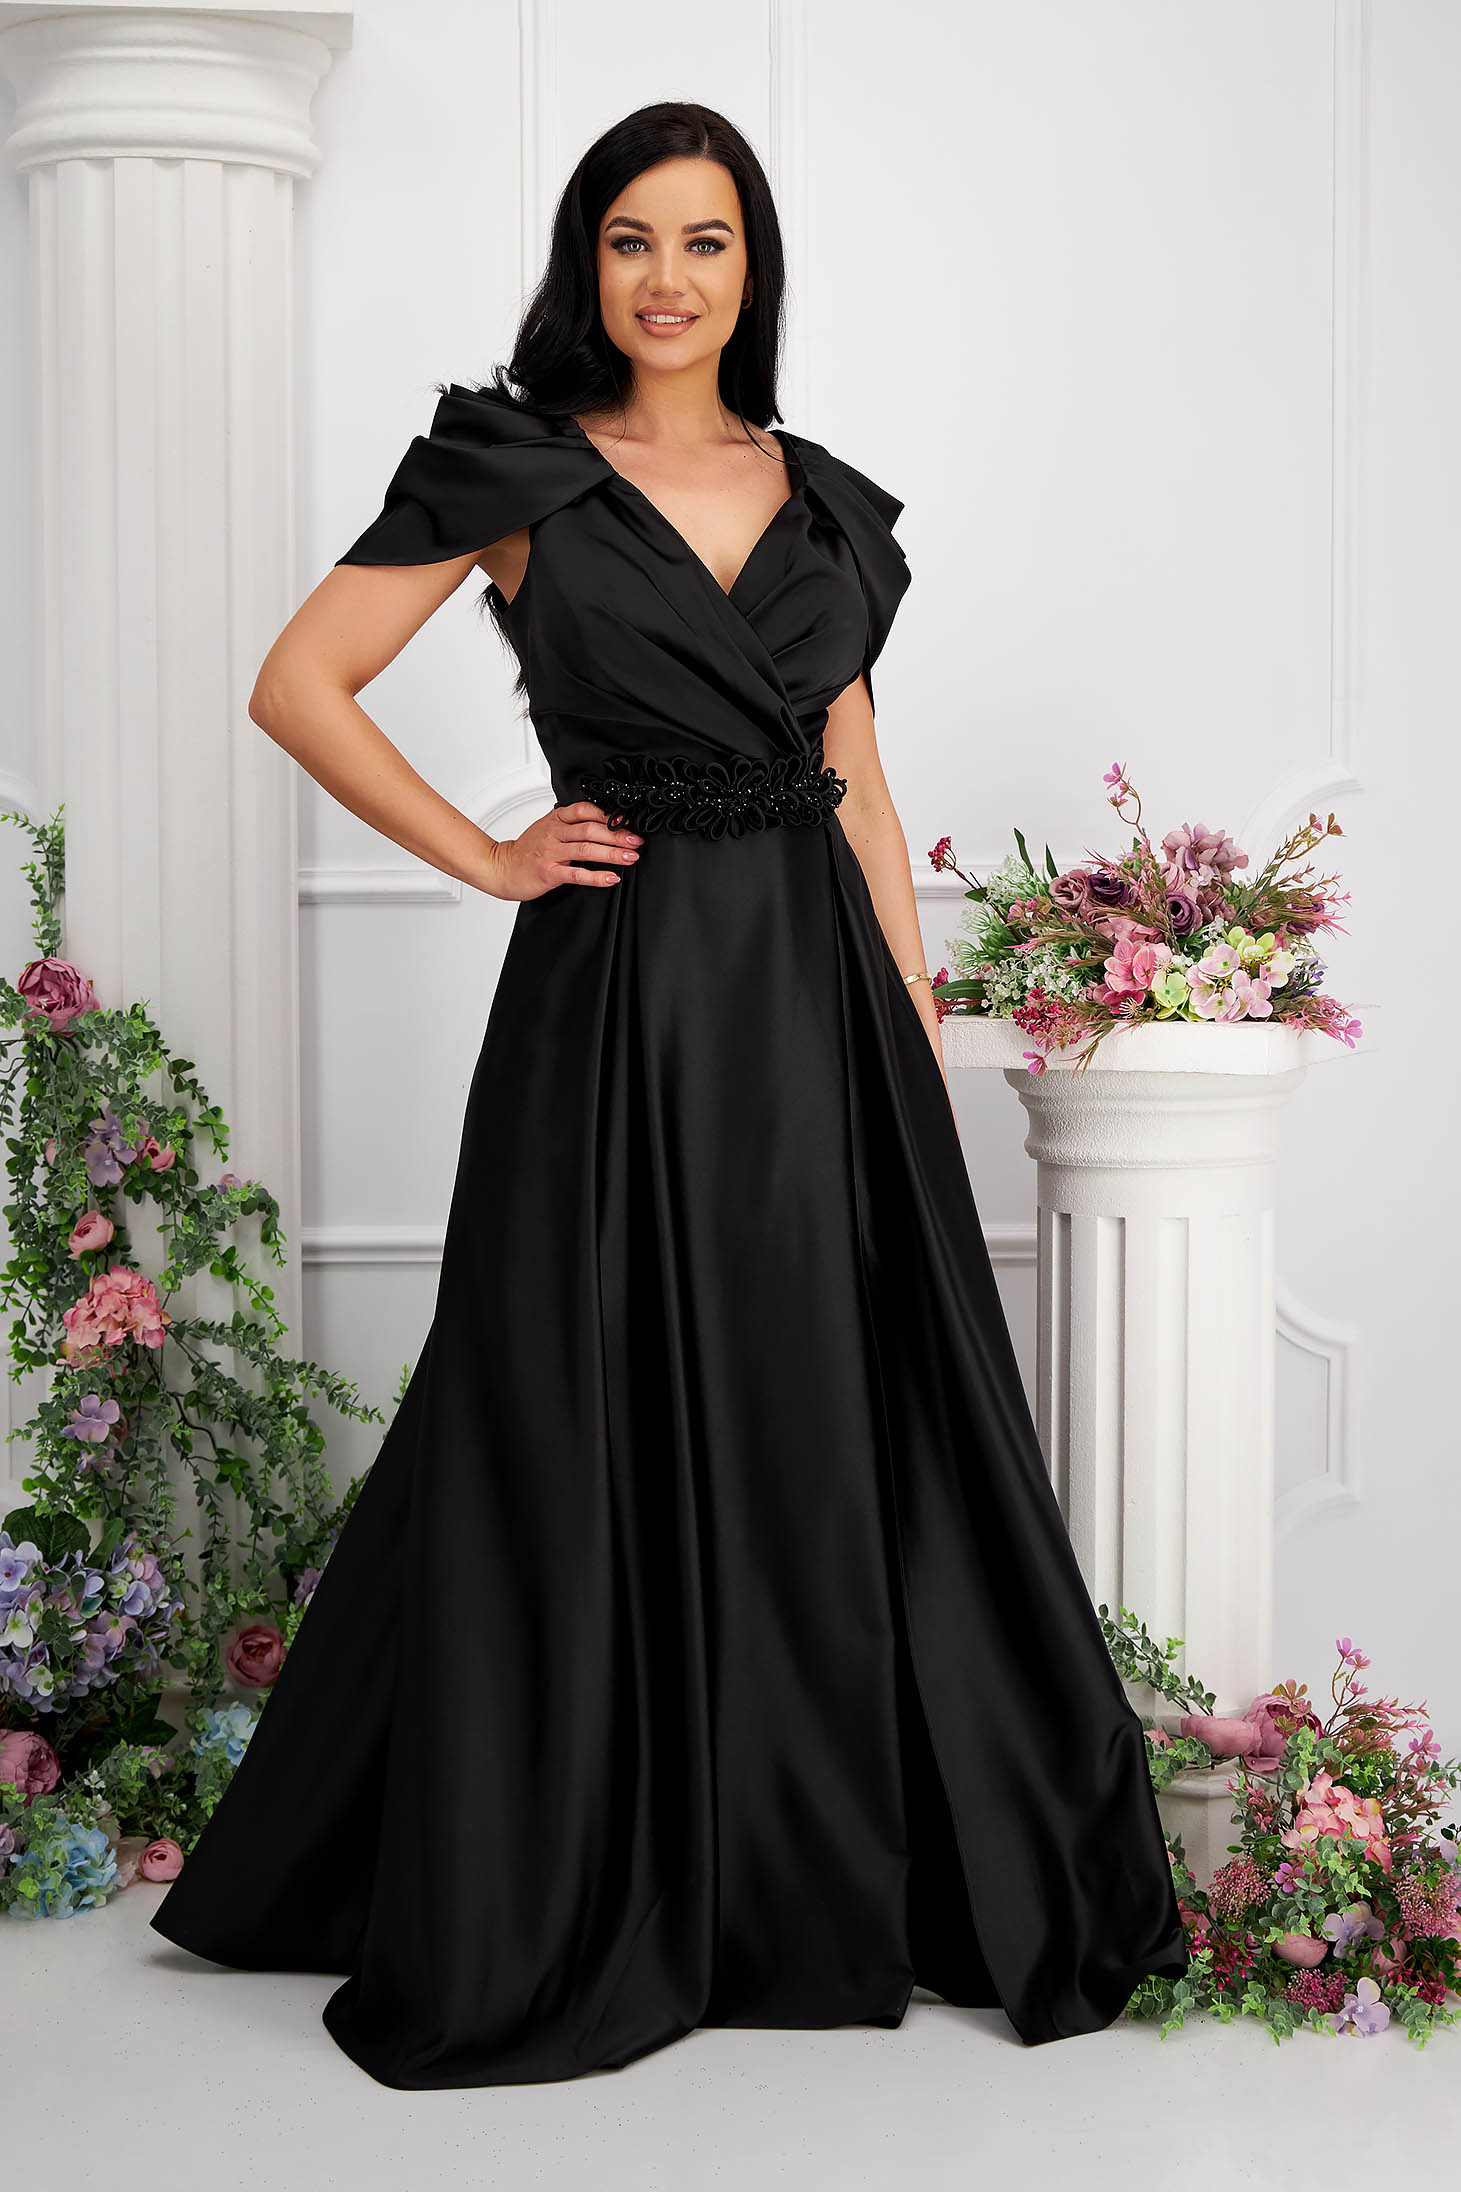 Black dress taffeta long cloche wrap over front with raised flowers